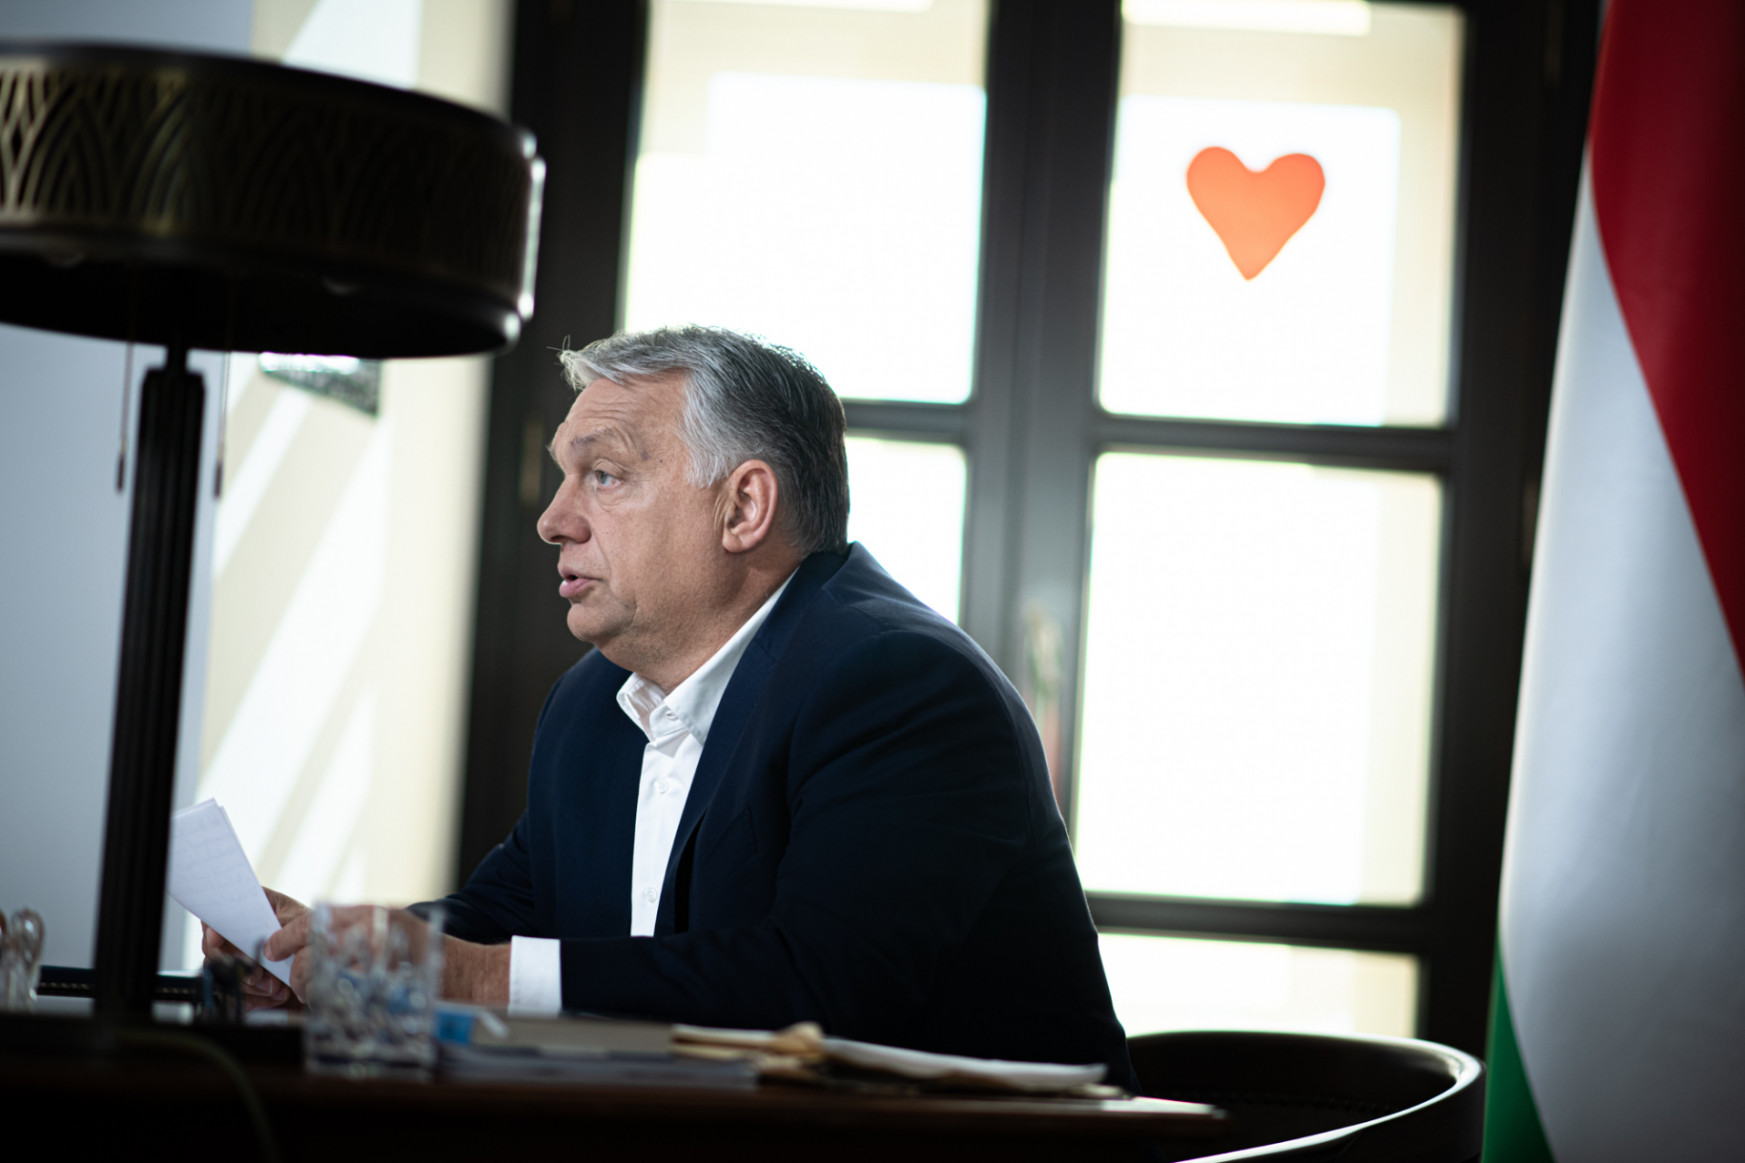 Why Orbán's "child protection referendum" makes no sense, and why it does